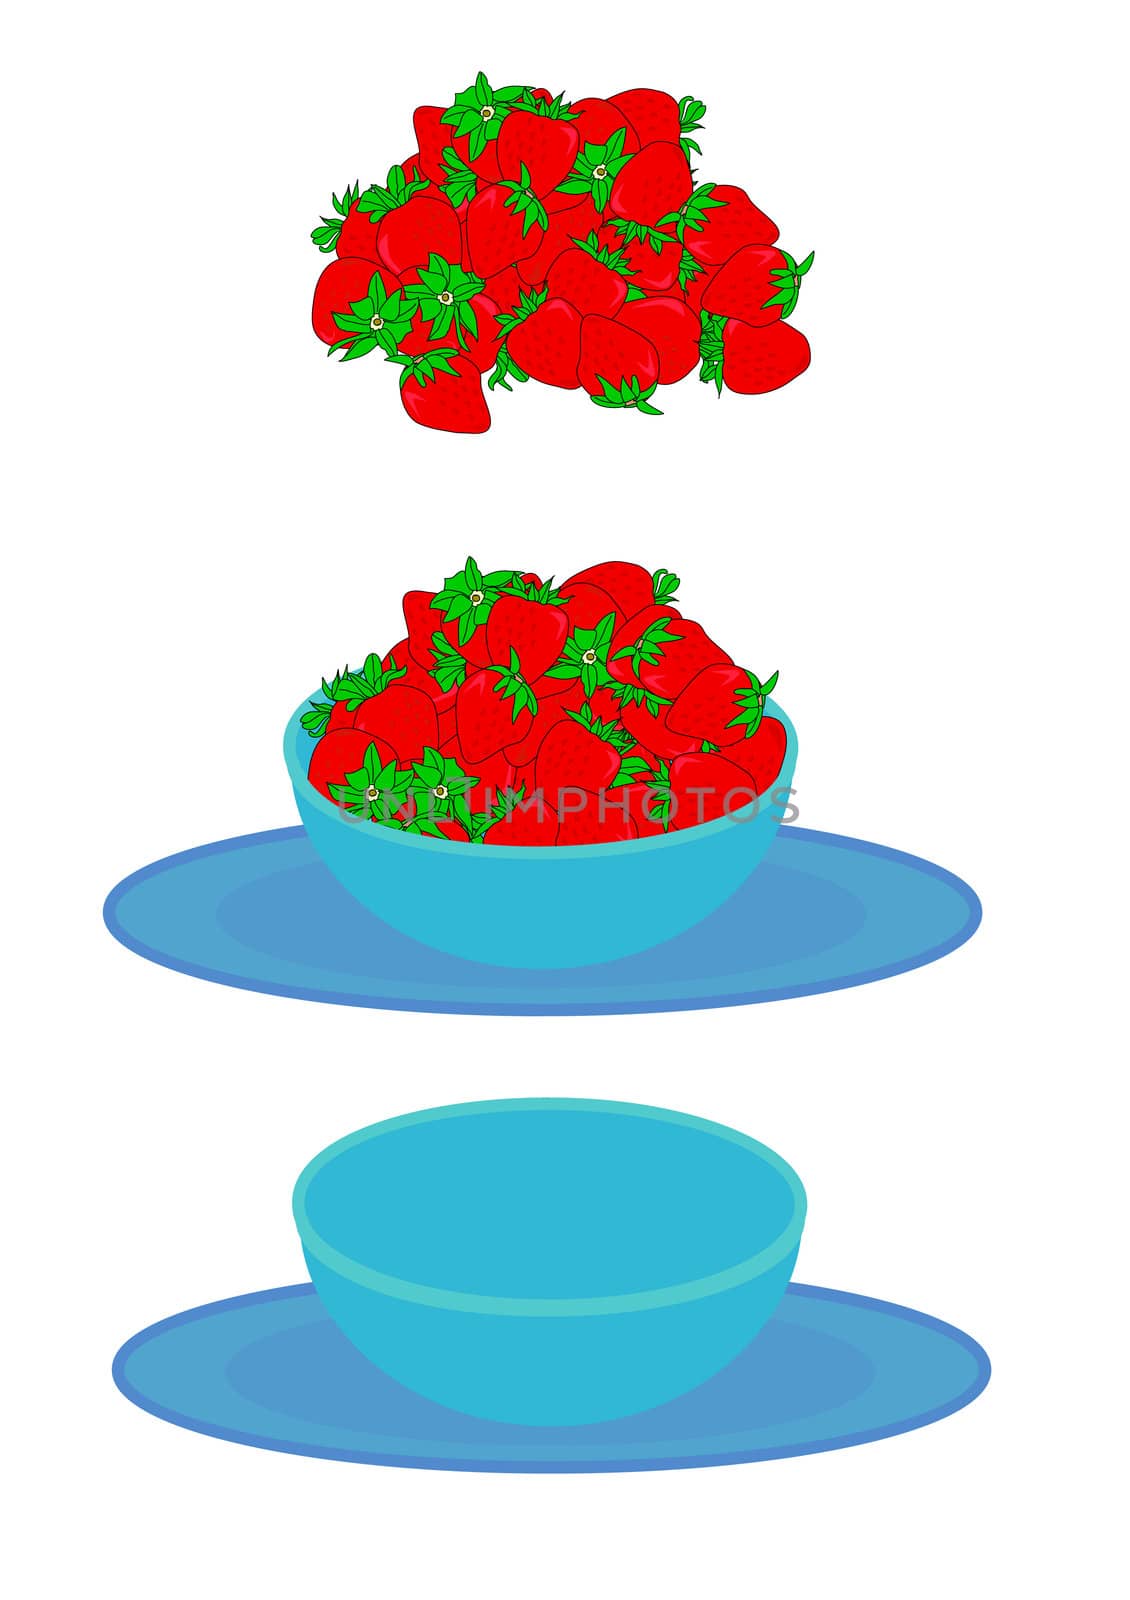 Vector illustration of a large serving of red ripe strawberries with green tops, a blue bowl and plate set, and a combination of both.